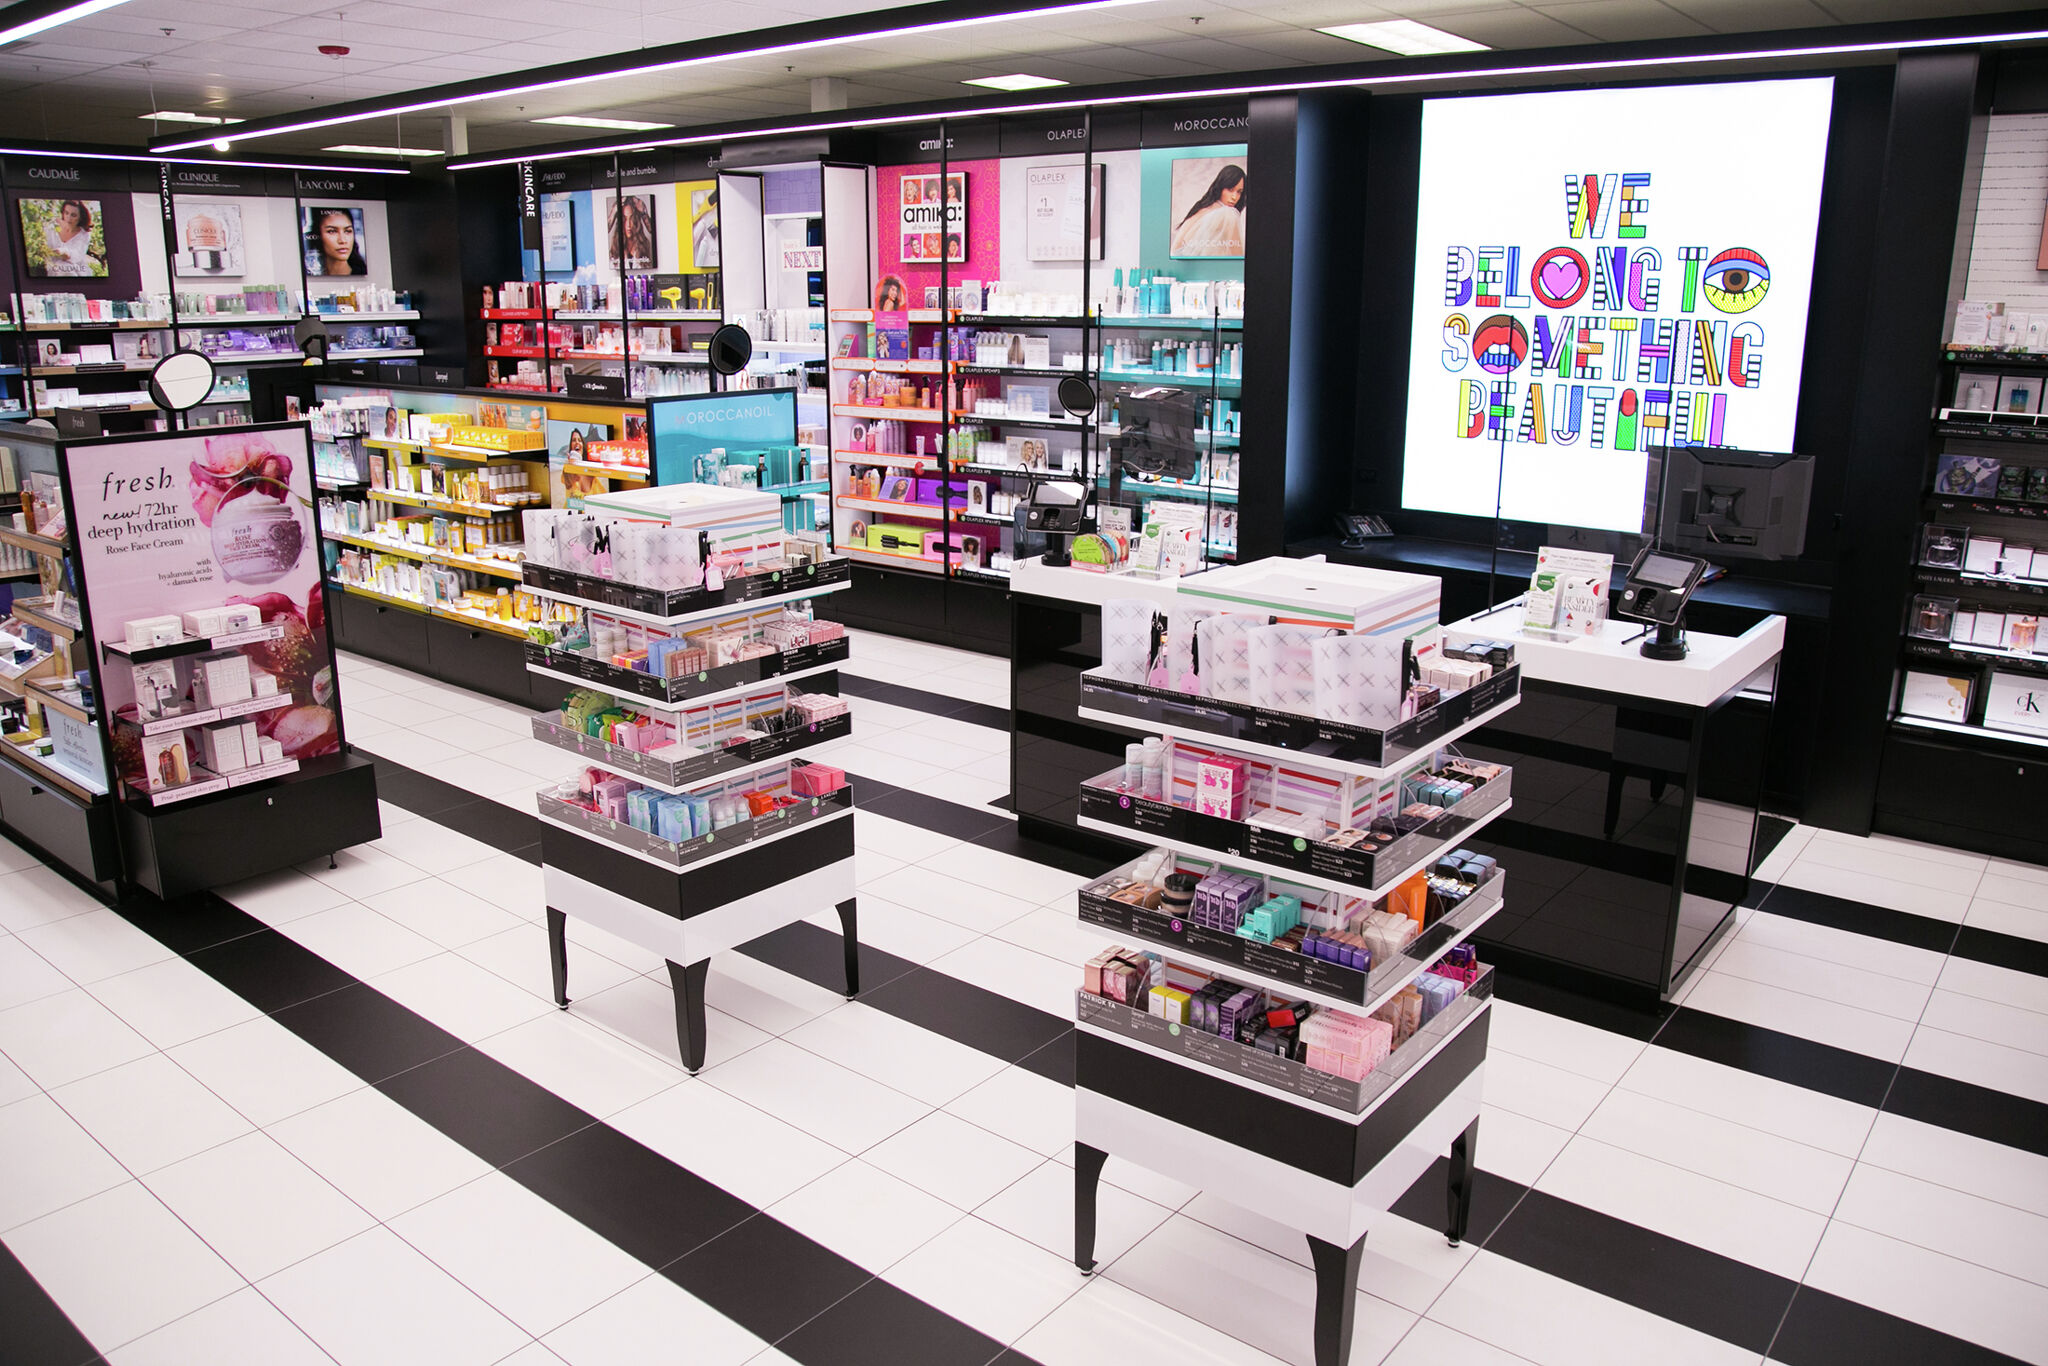 Sephora joins Kohl's in Springfield as part of nationwide